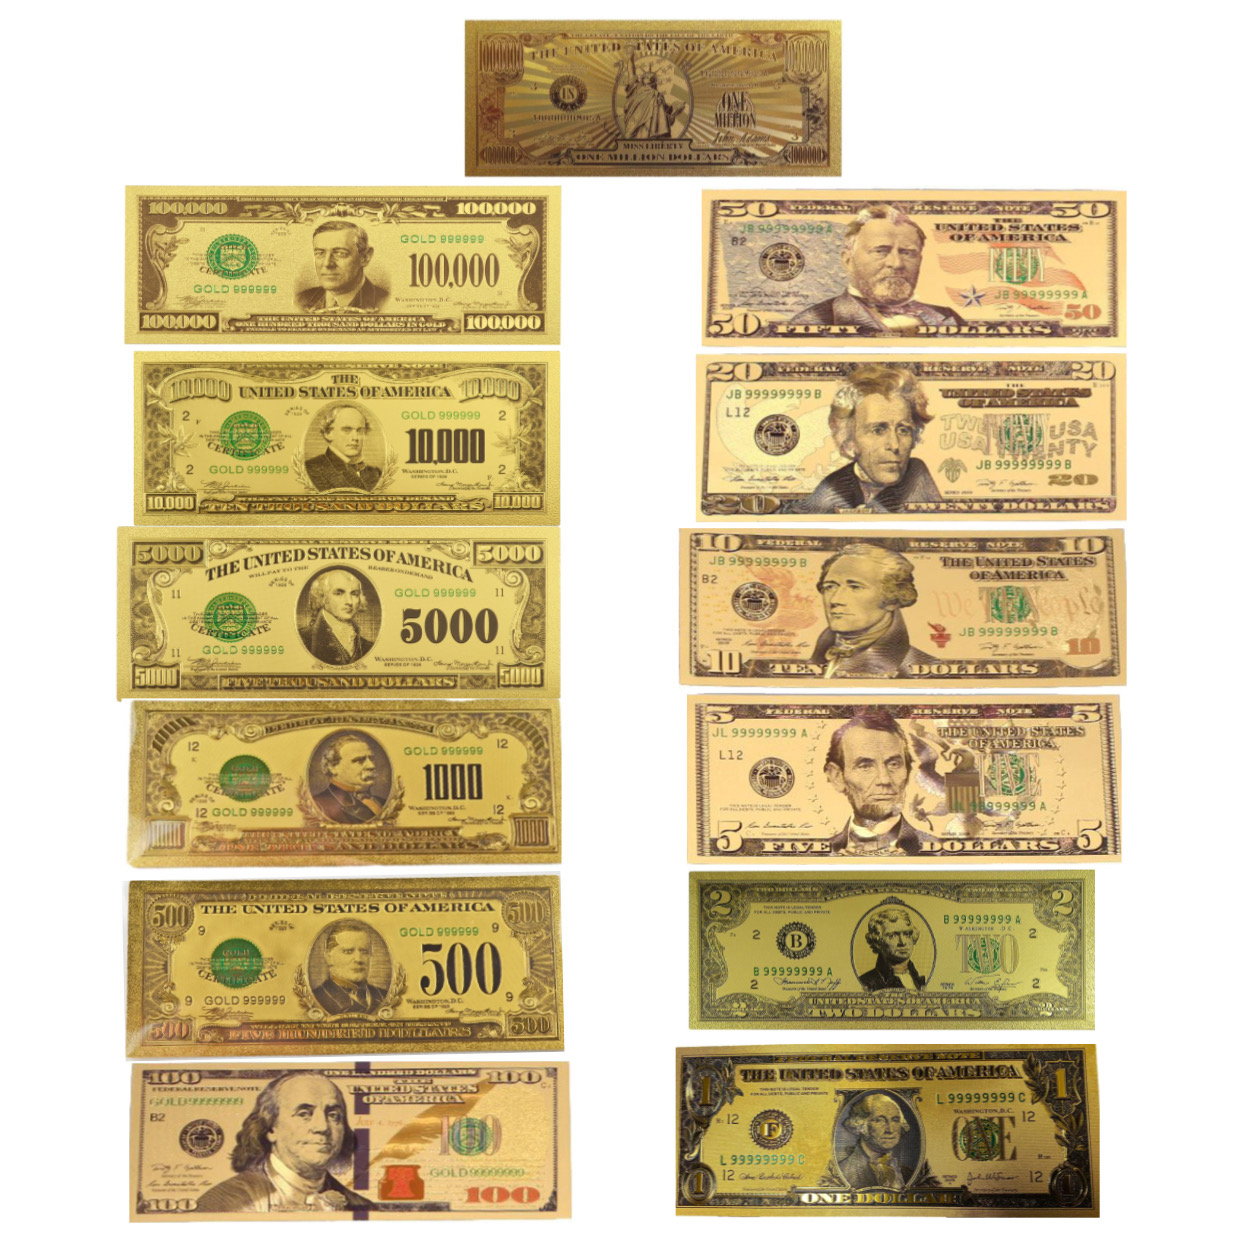 Mega Max 24K Gold Plated US Dollar Fake Banknotes Set of 13 Timeless Collection Protector Sold Separately 24K Gold and Silver Plated Replica Bills 3